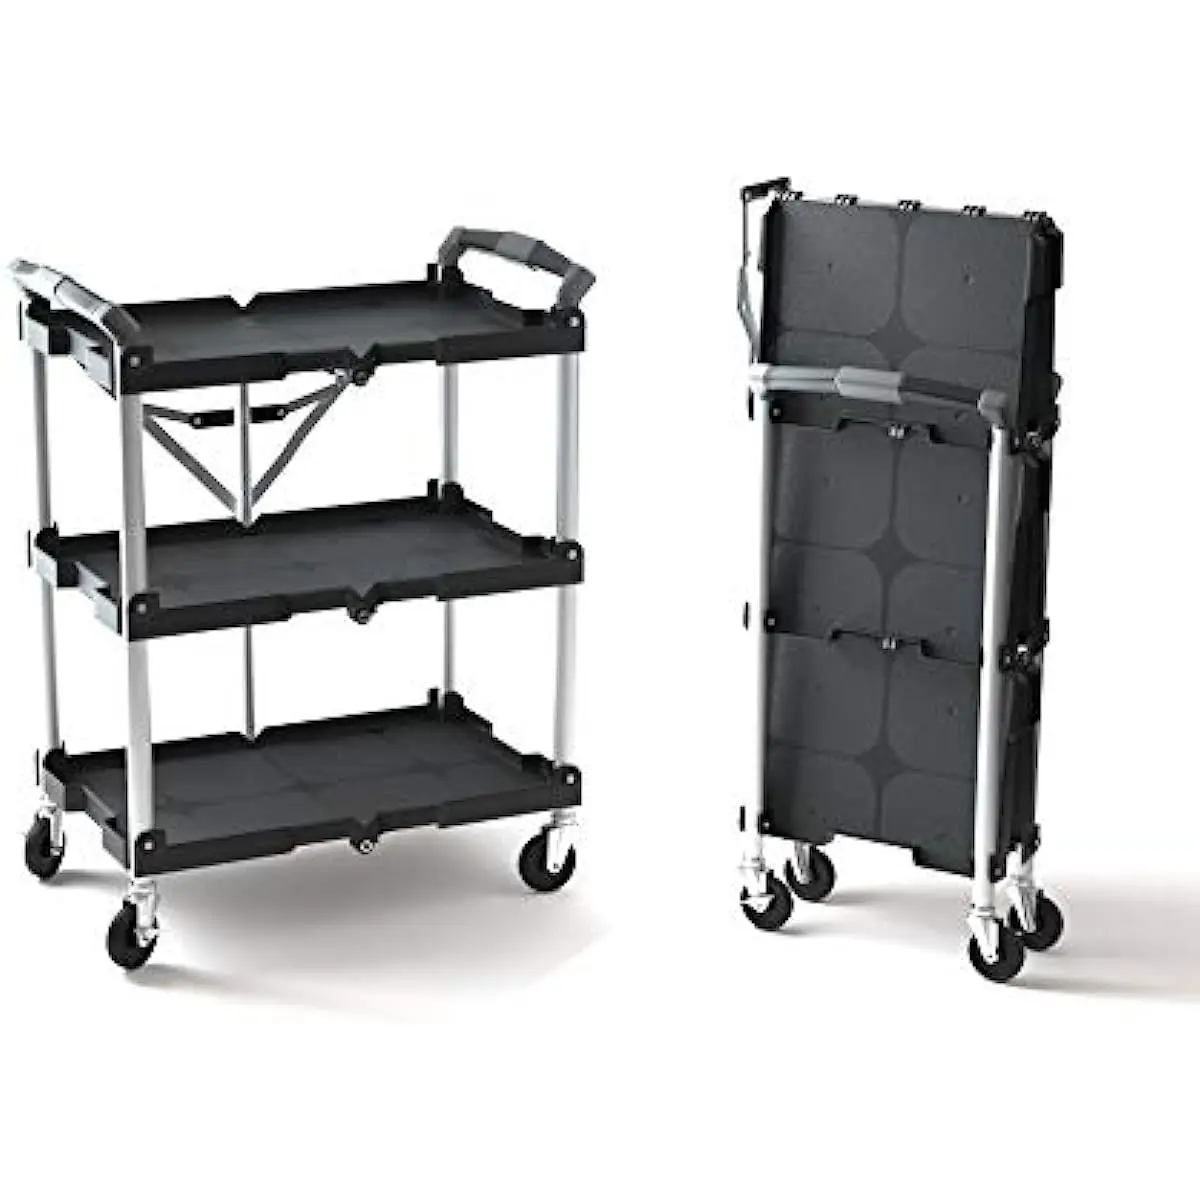 

Tools 85-188 Pack-N-Roll Folding Collapsible Service Cart Black 50 Lb. Load Capacity per Shelf